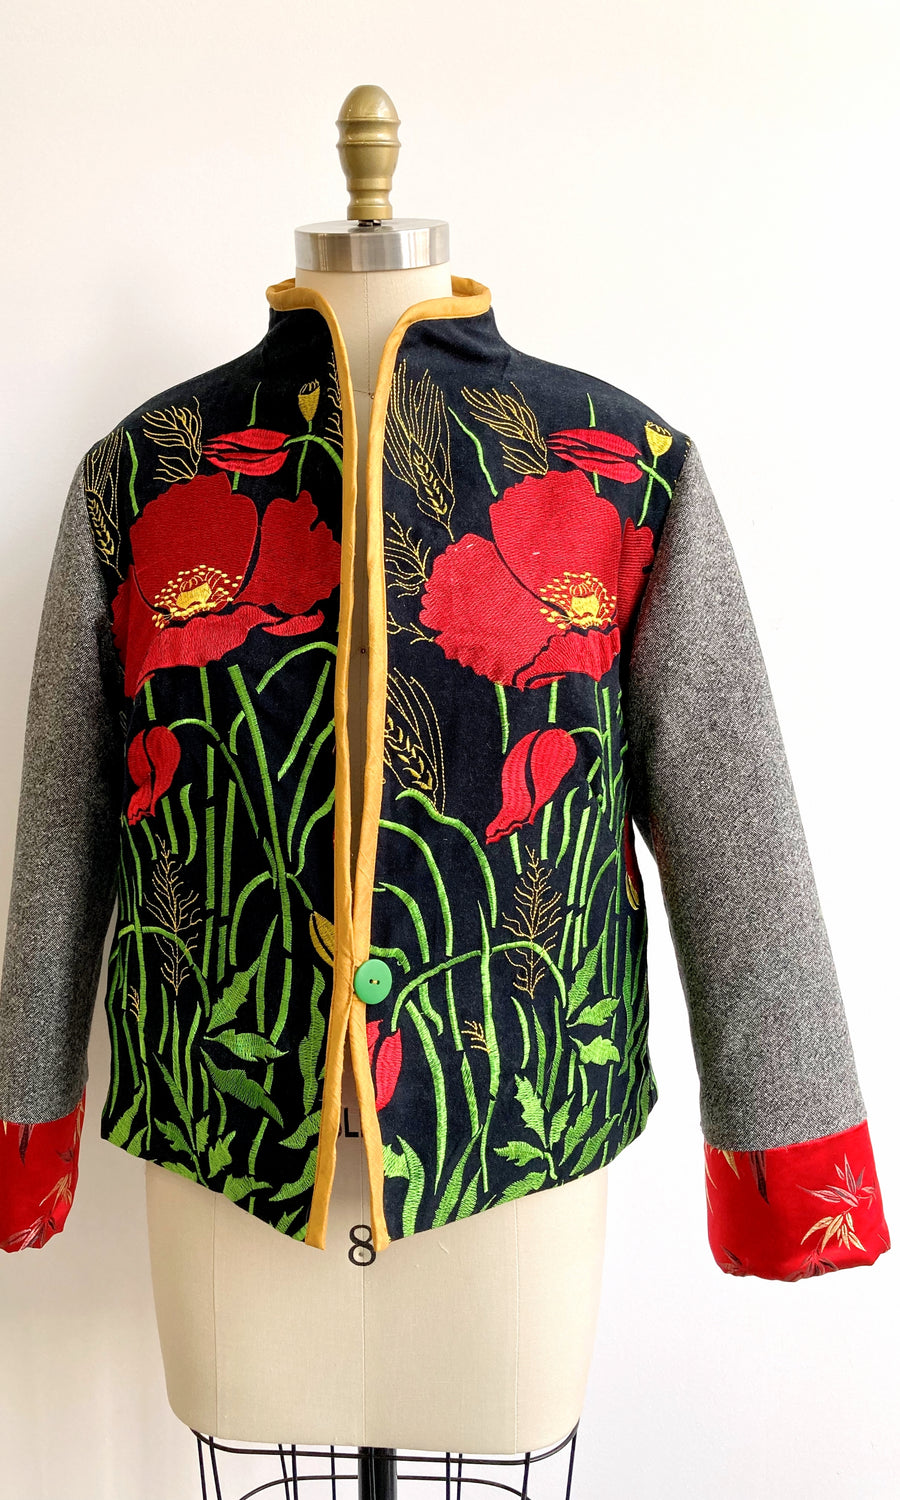 Reversible Embroidered & Quilted Jacket, size Large